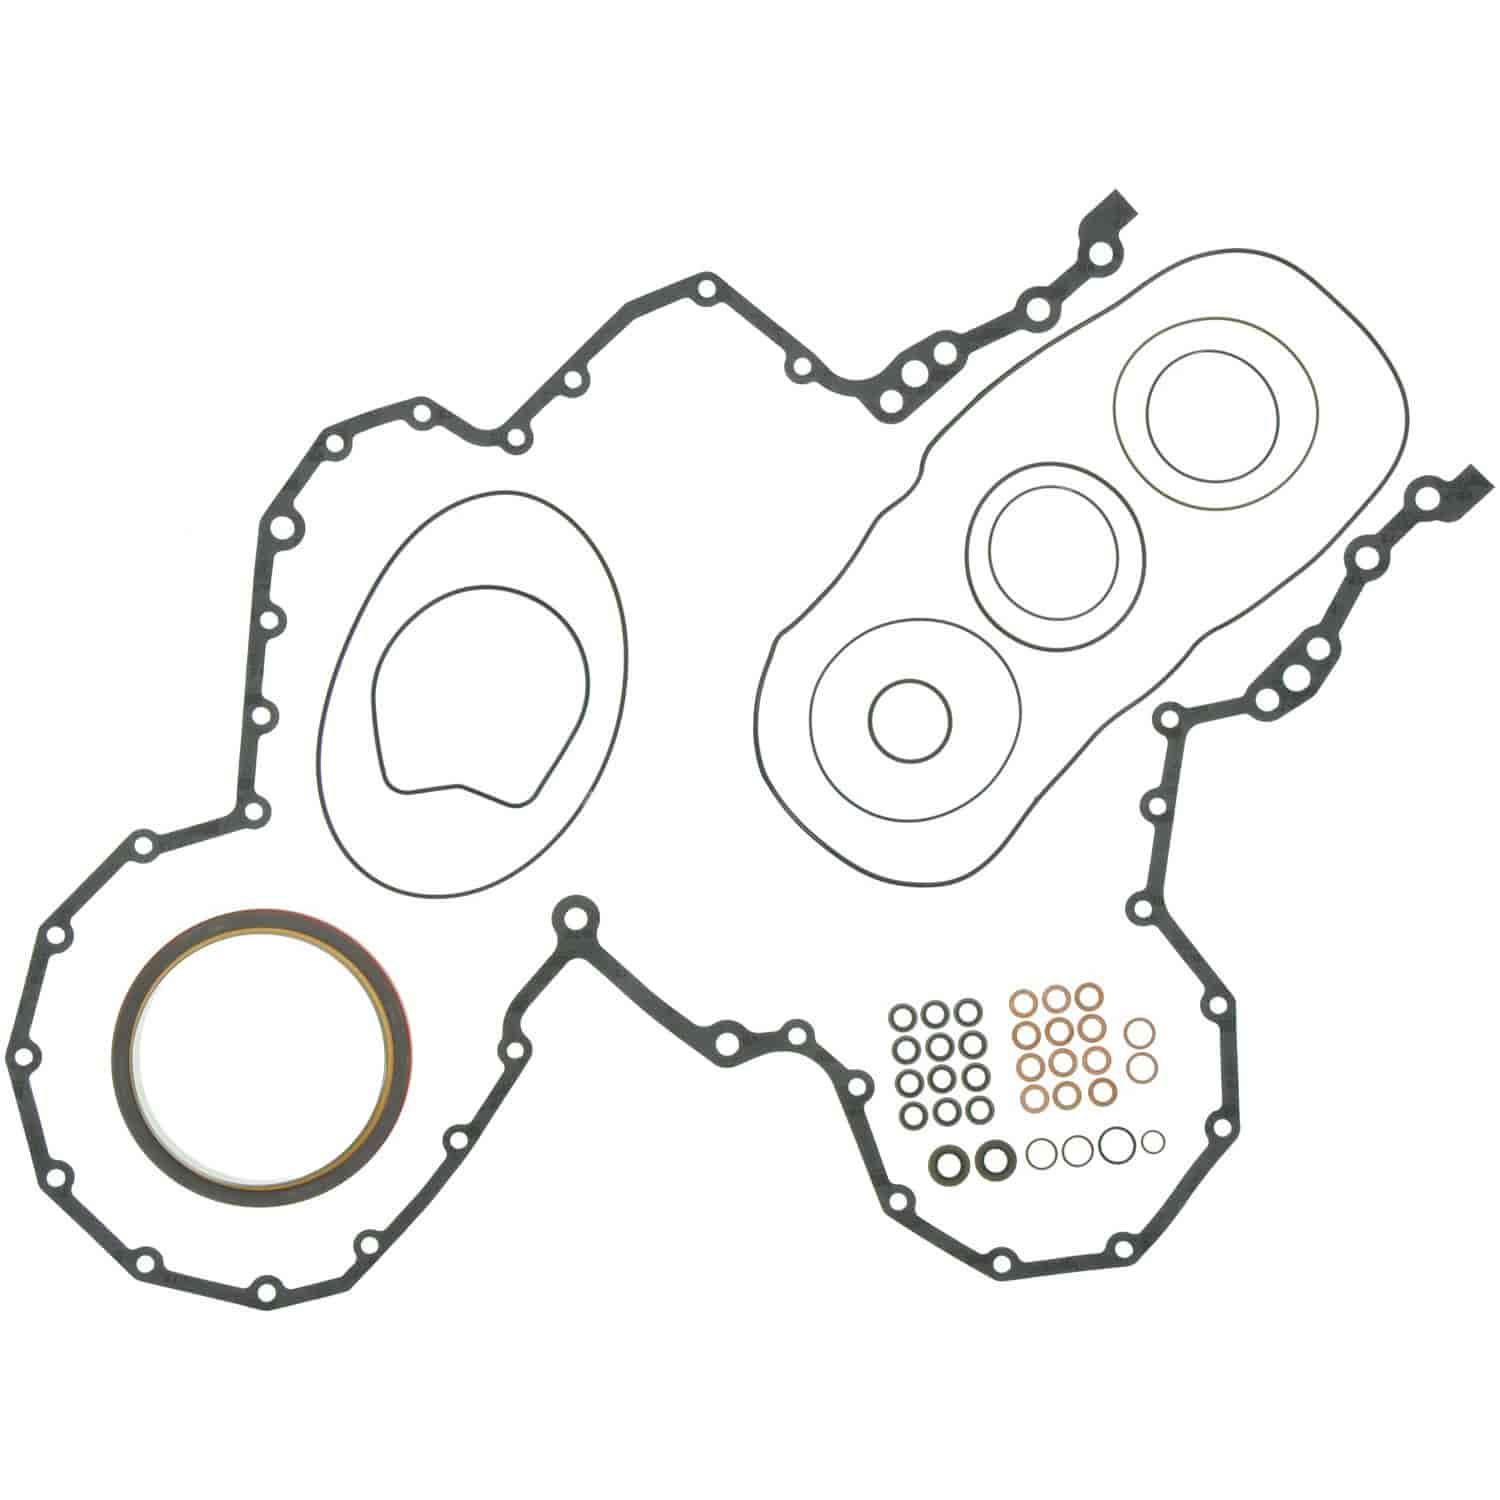 Timing Cover Set Caterpillar 3406E Front Cover Set. See Product Bulletin for Arr. Ser. Num